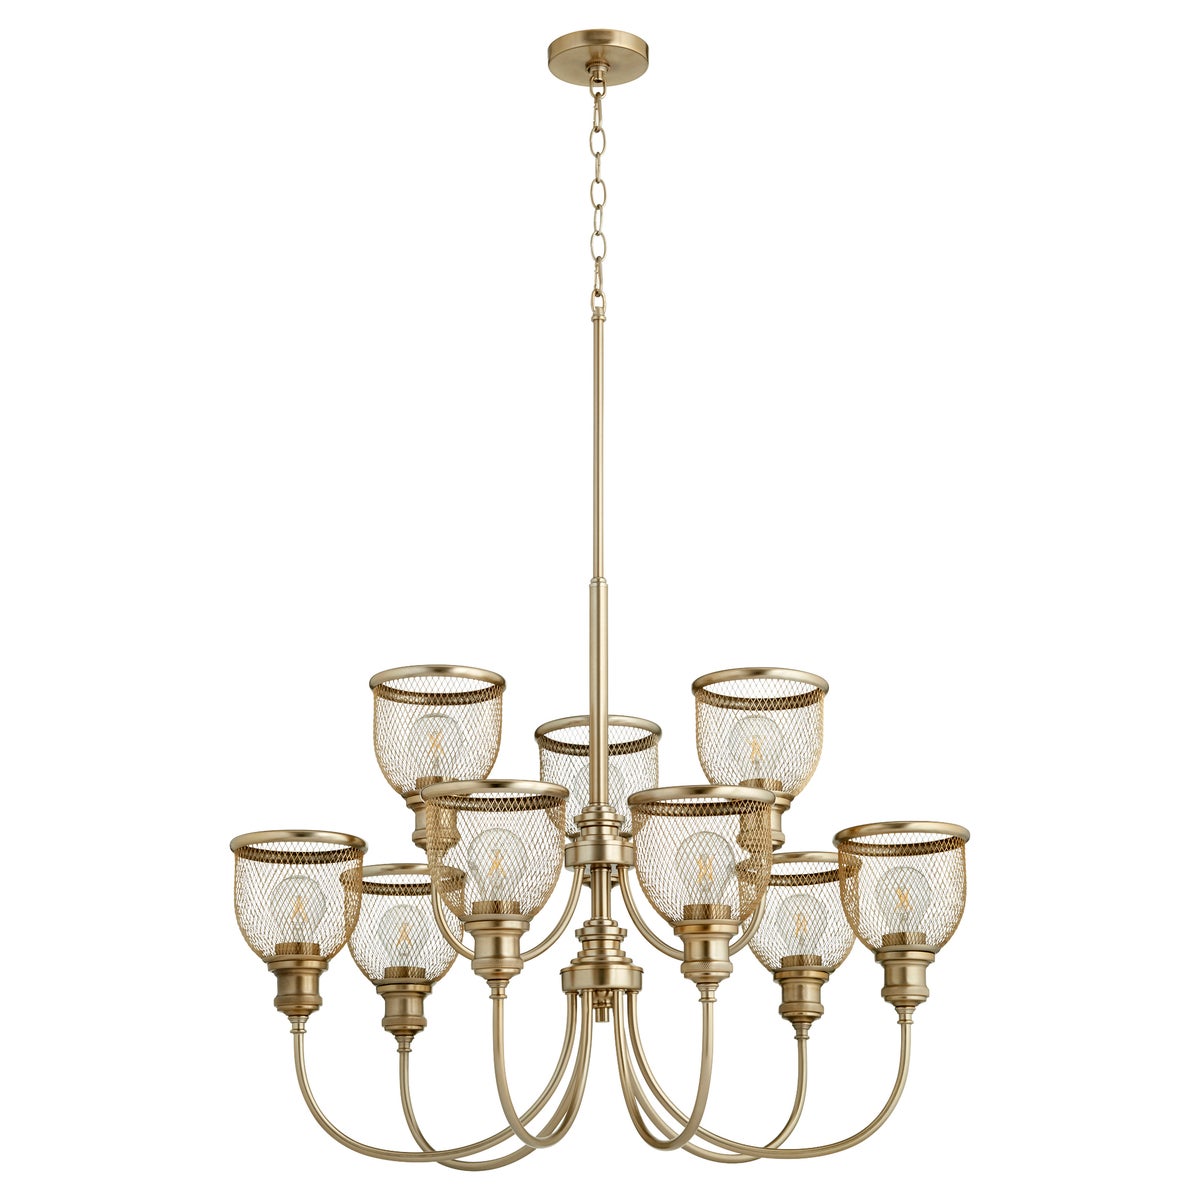 Industrial Chandelier with wire mesh shades, showcasing a marvelous mesh silhouette and subtle shaded bulbs. Transitional styling for contemporary and traditional settings. 32"W x 25.25"H. Quorum International.